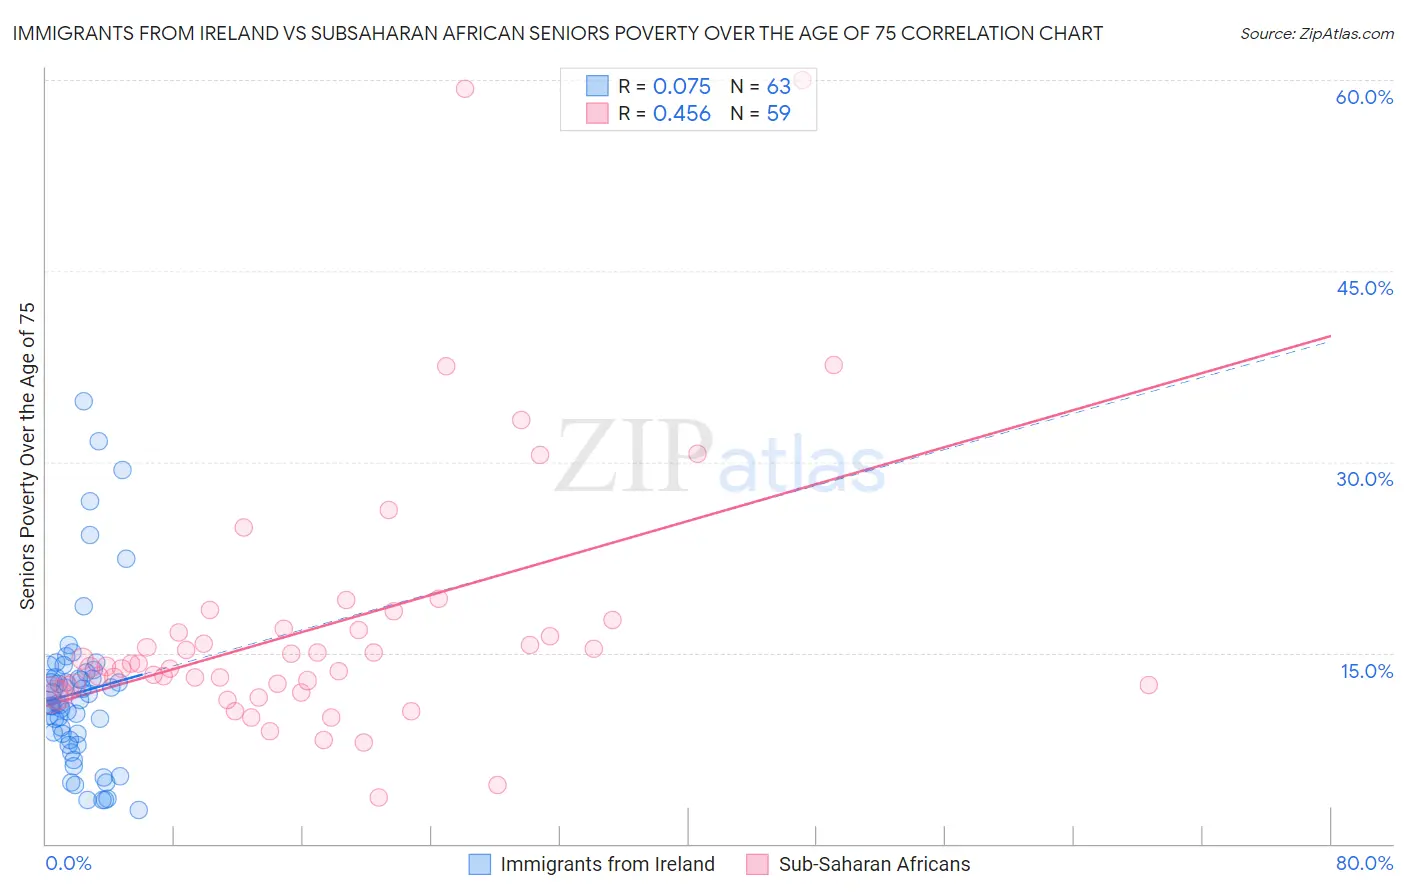 Immigrants from Ireland vs Subsaharan African Seniors Poverty Over the Age of 75